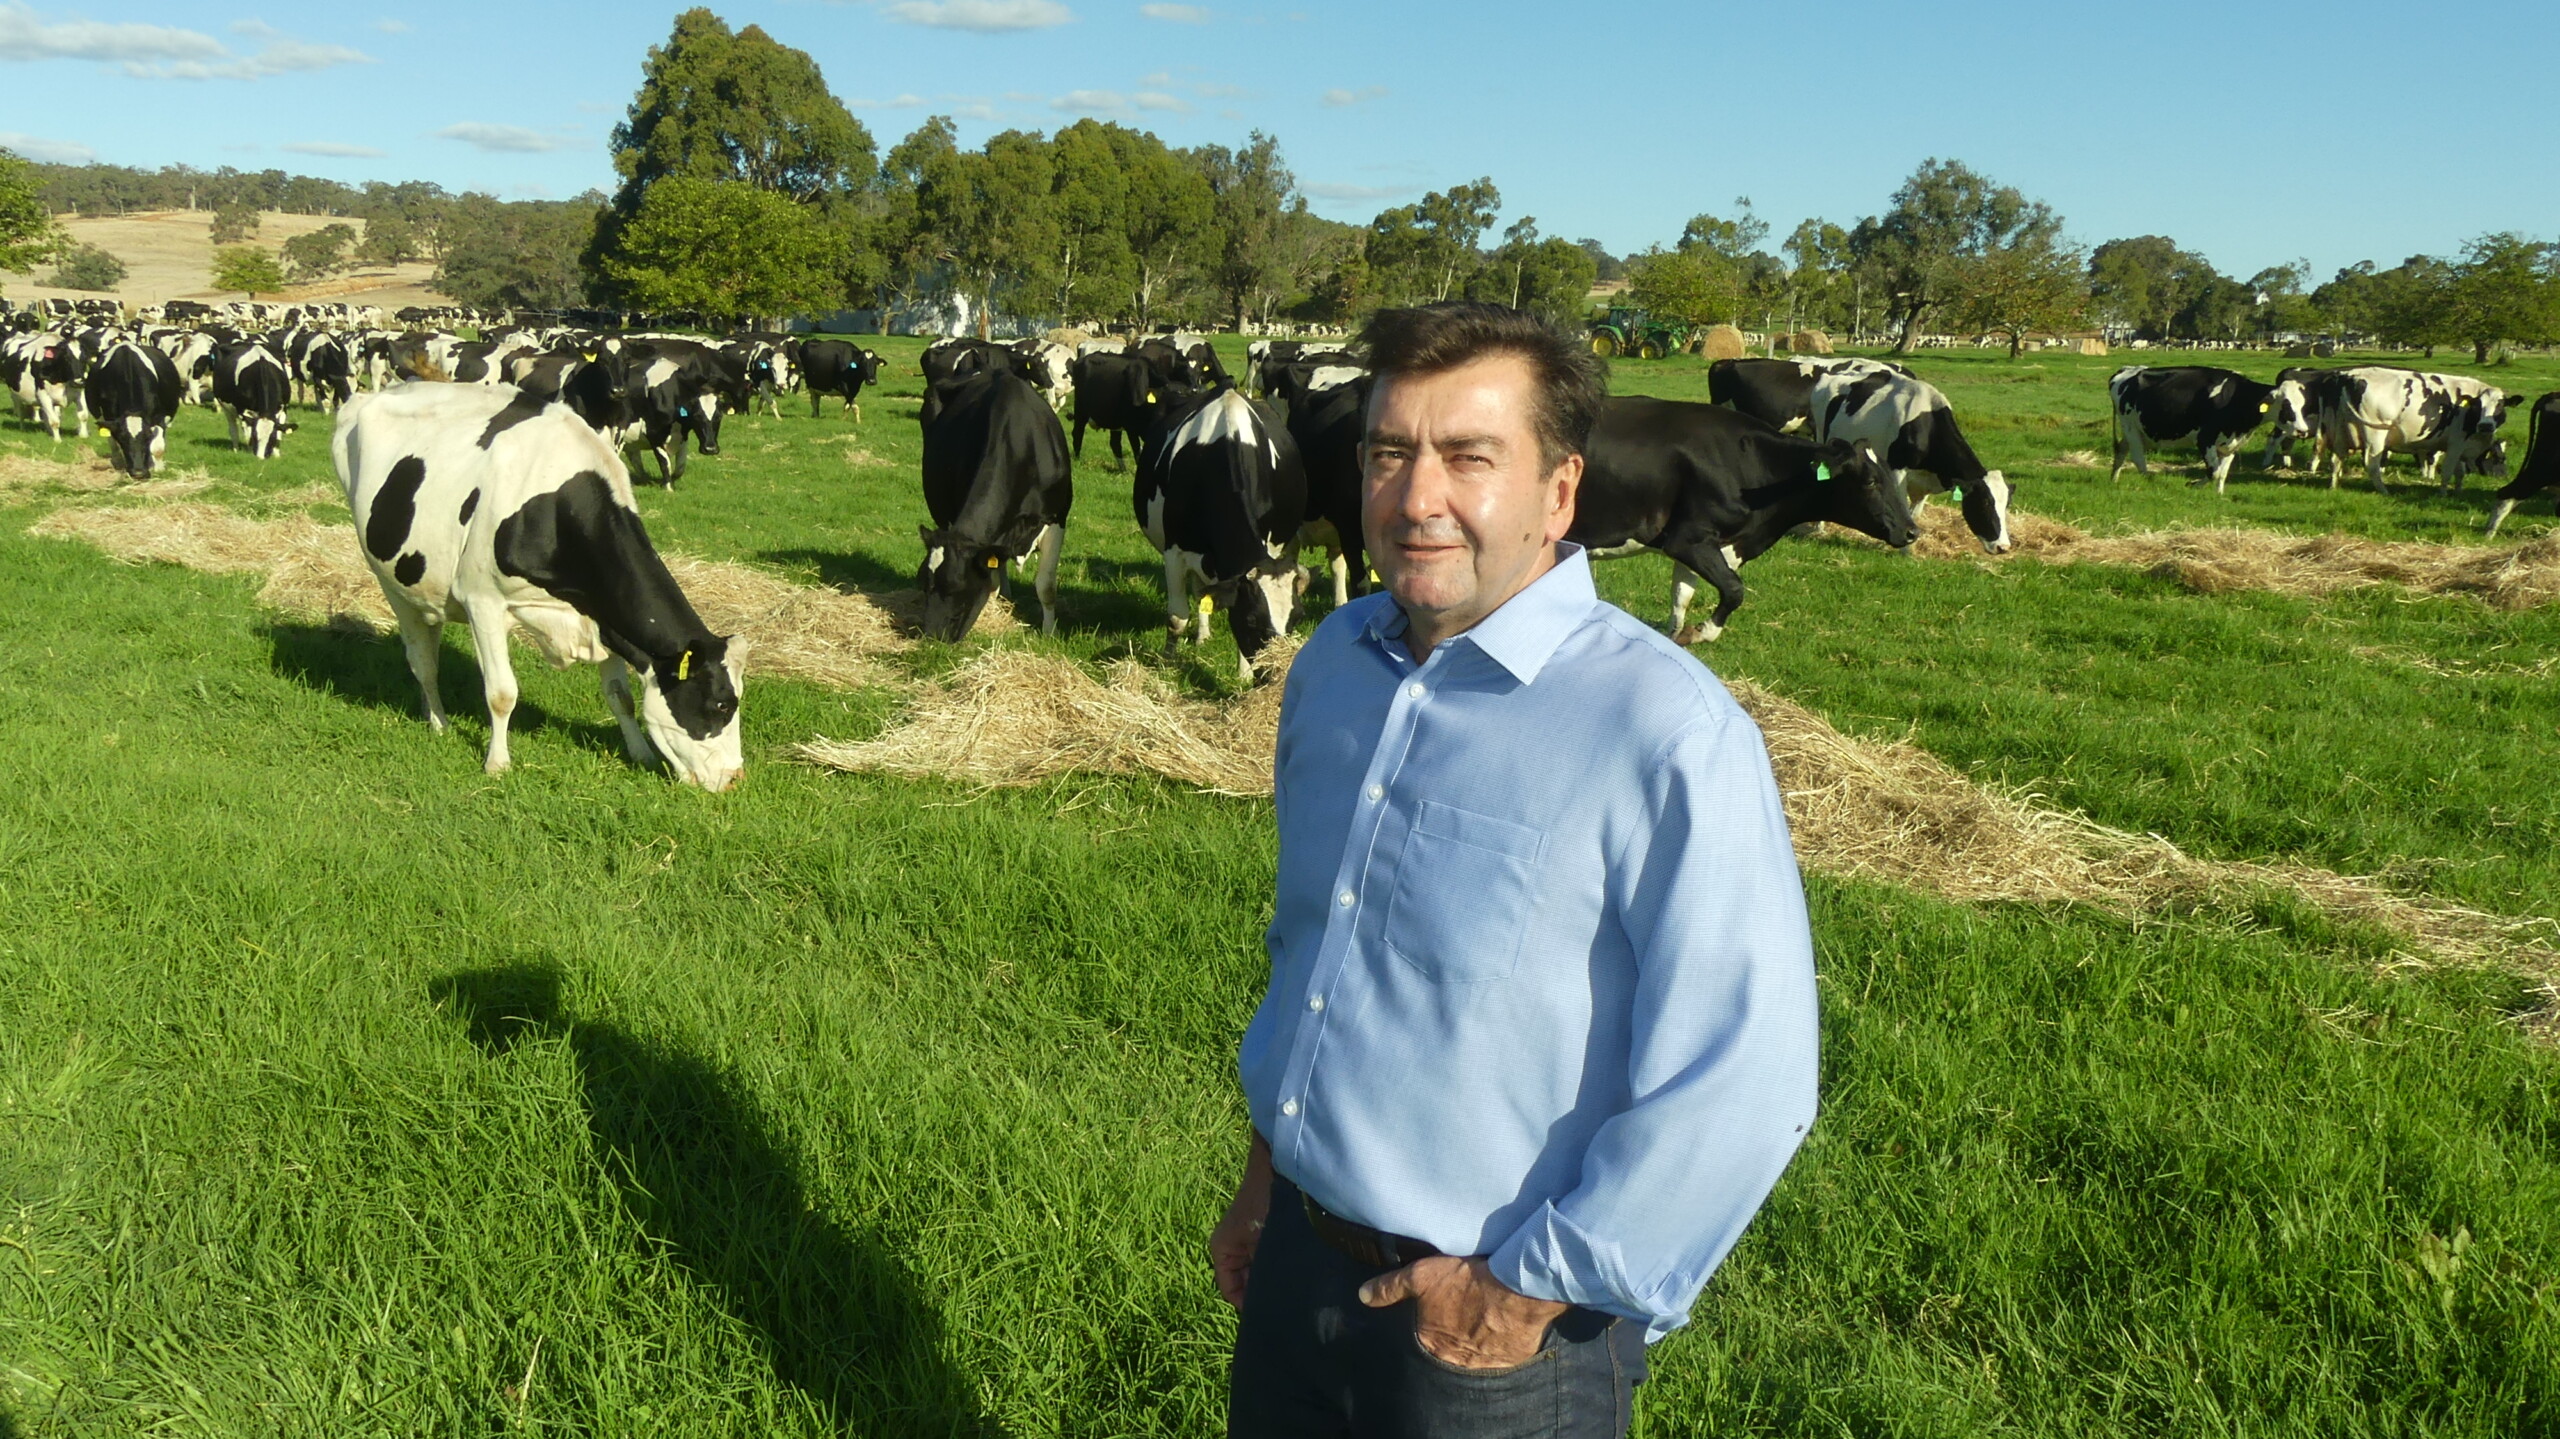 David Messina with cows in the field